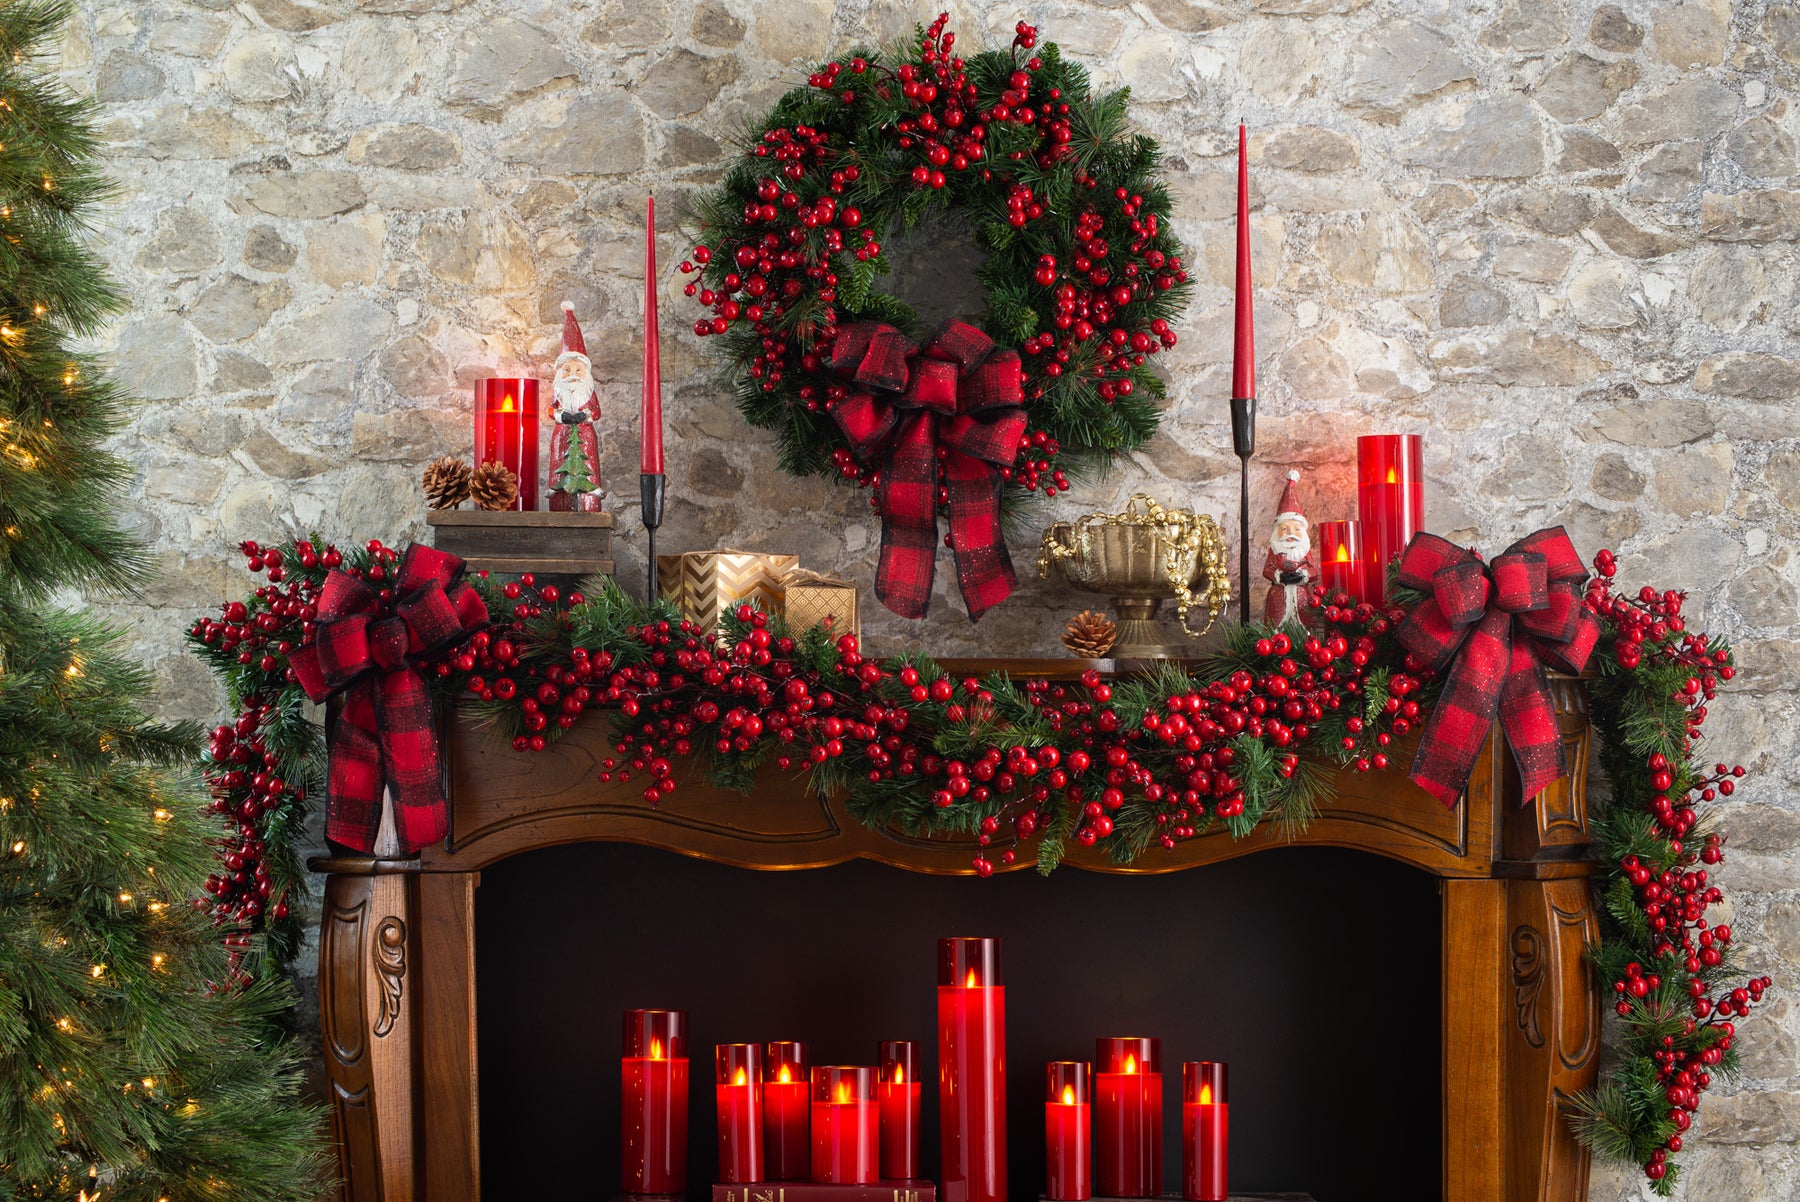 6 Feet Holiday Garland Red Berry Garland Christmas Table Decor